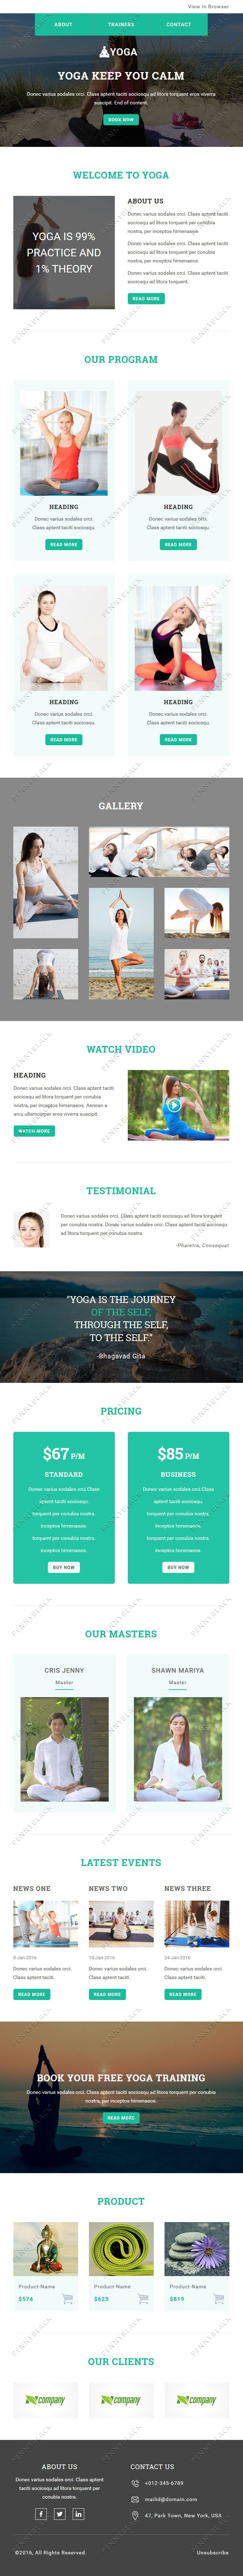 Yoga - Responsive Email Template